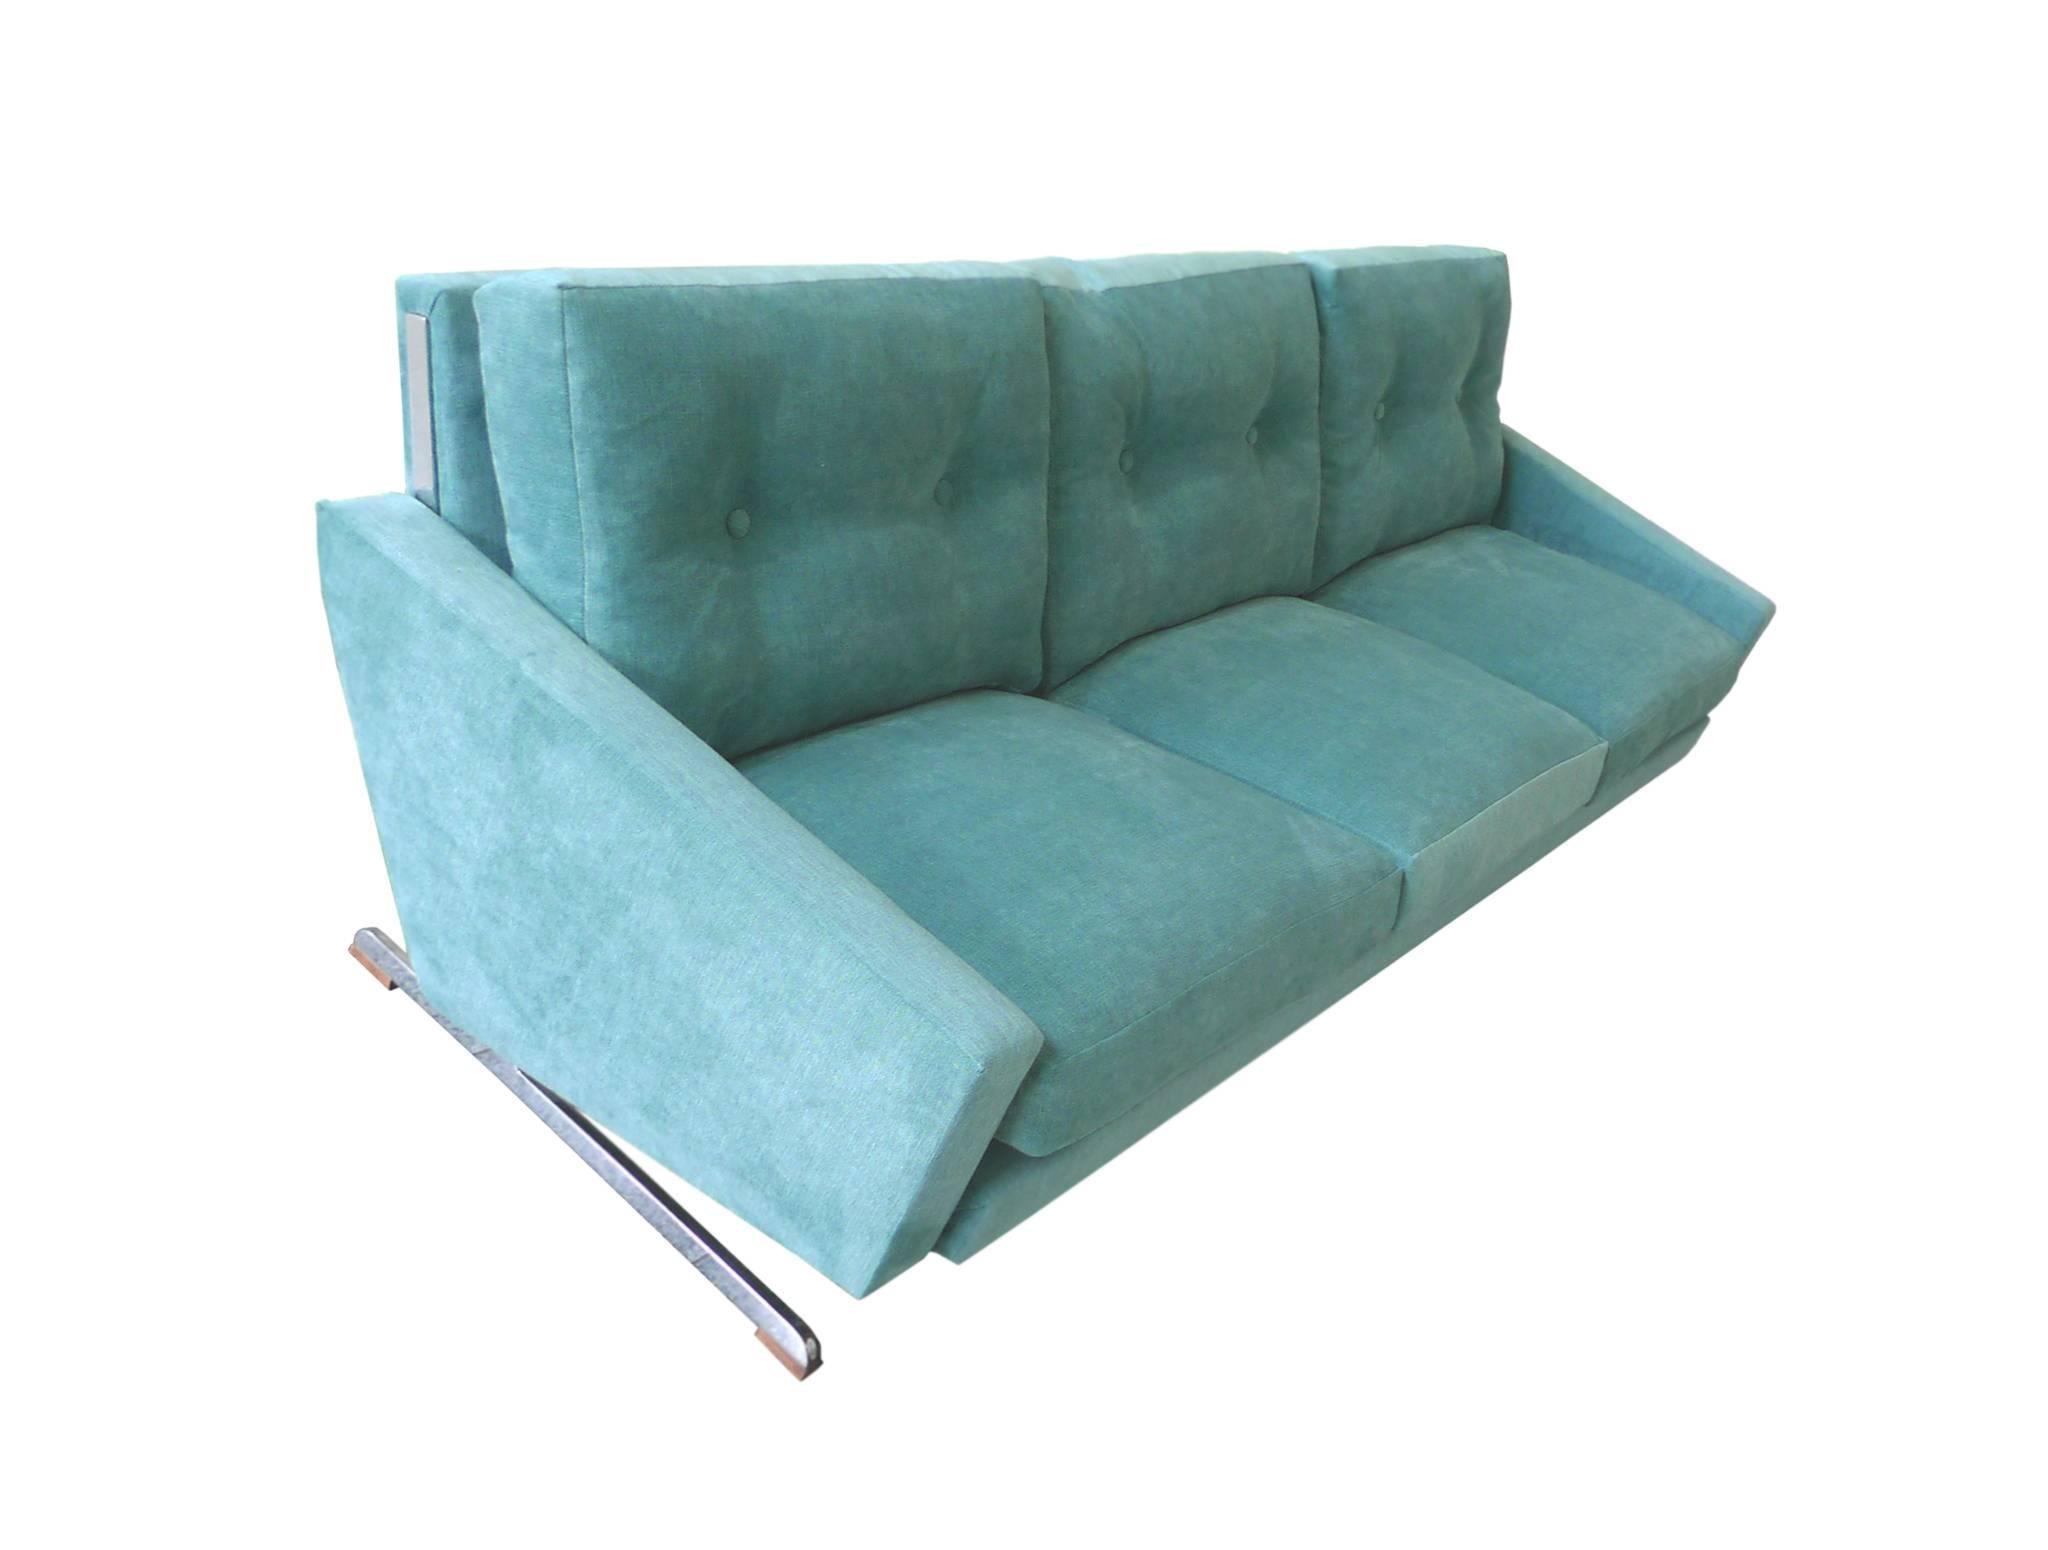 This Danish Midcentury sofa is by Johannes Andersen. His furniture are renowned for their soft, sculptural shapes - in combinations of teak, chrome and well padded upholstery. This sofa's dynamic design includes a slightly tilted back and